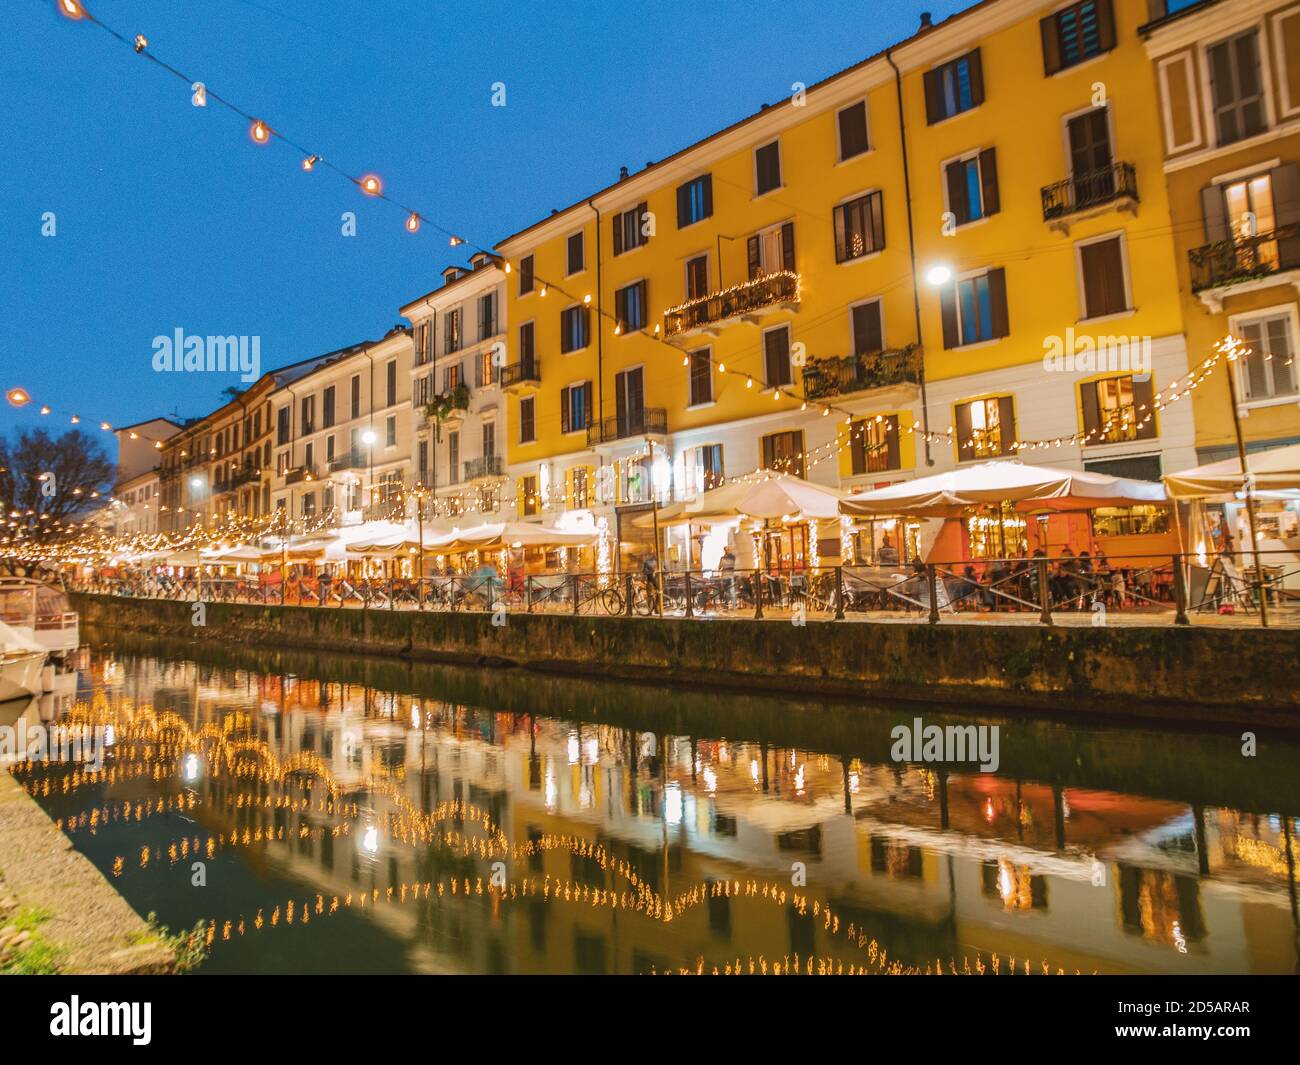 It's Christmas time on the 'Navigli' with thousands of lights reflected in the canal of the famous tourist district in December. Milan, Lombardy, Ital Stock Photo